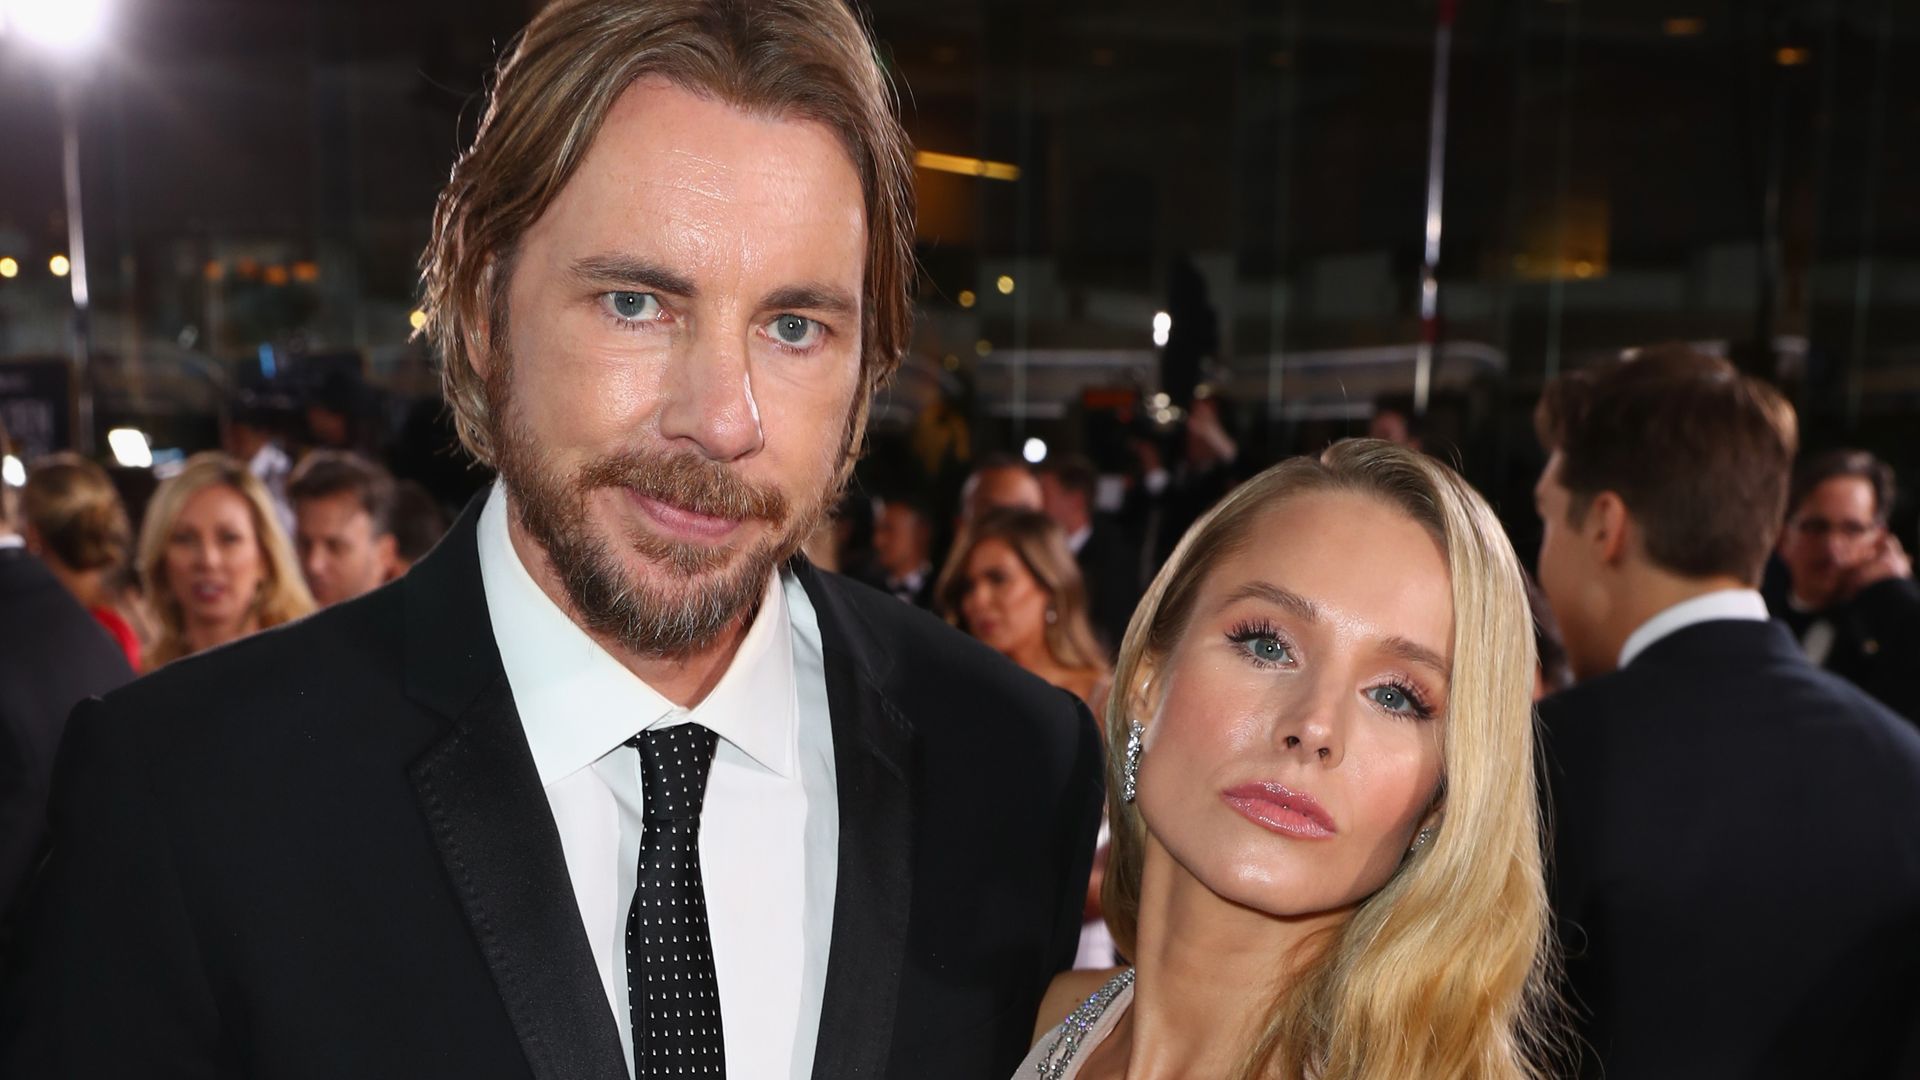 Dax Shepard and Kristen Bell attend Moet & Chandon at The 76th Annual Golden Globe Awards